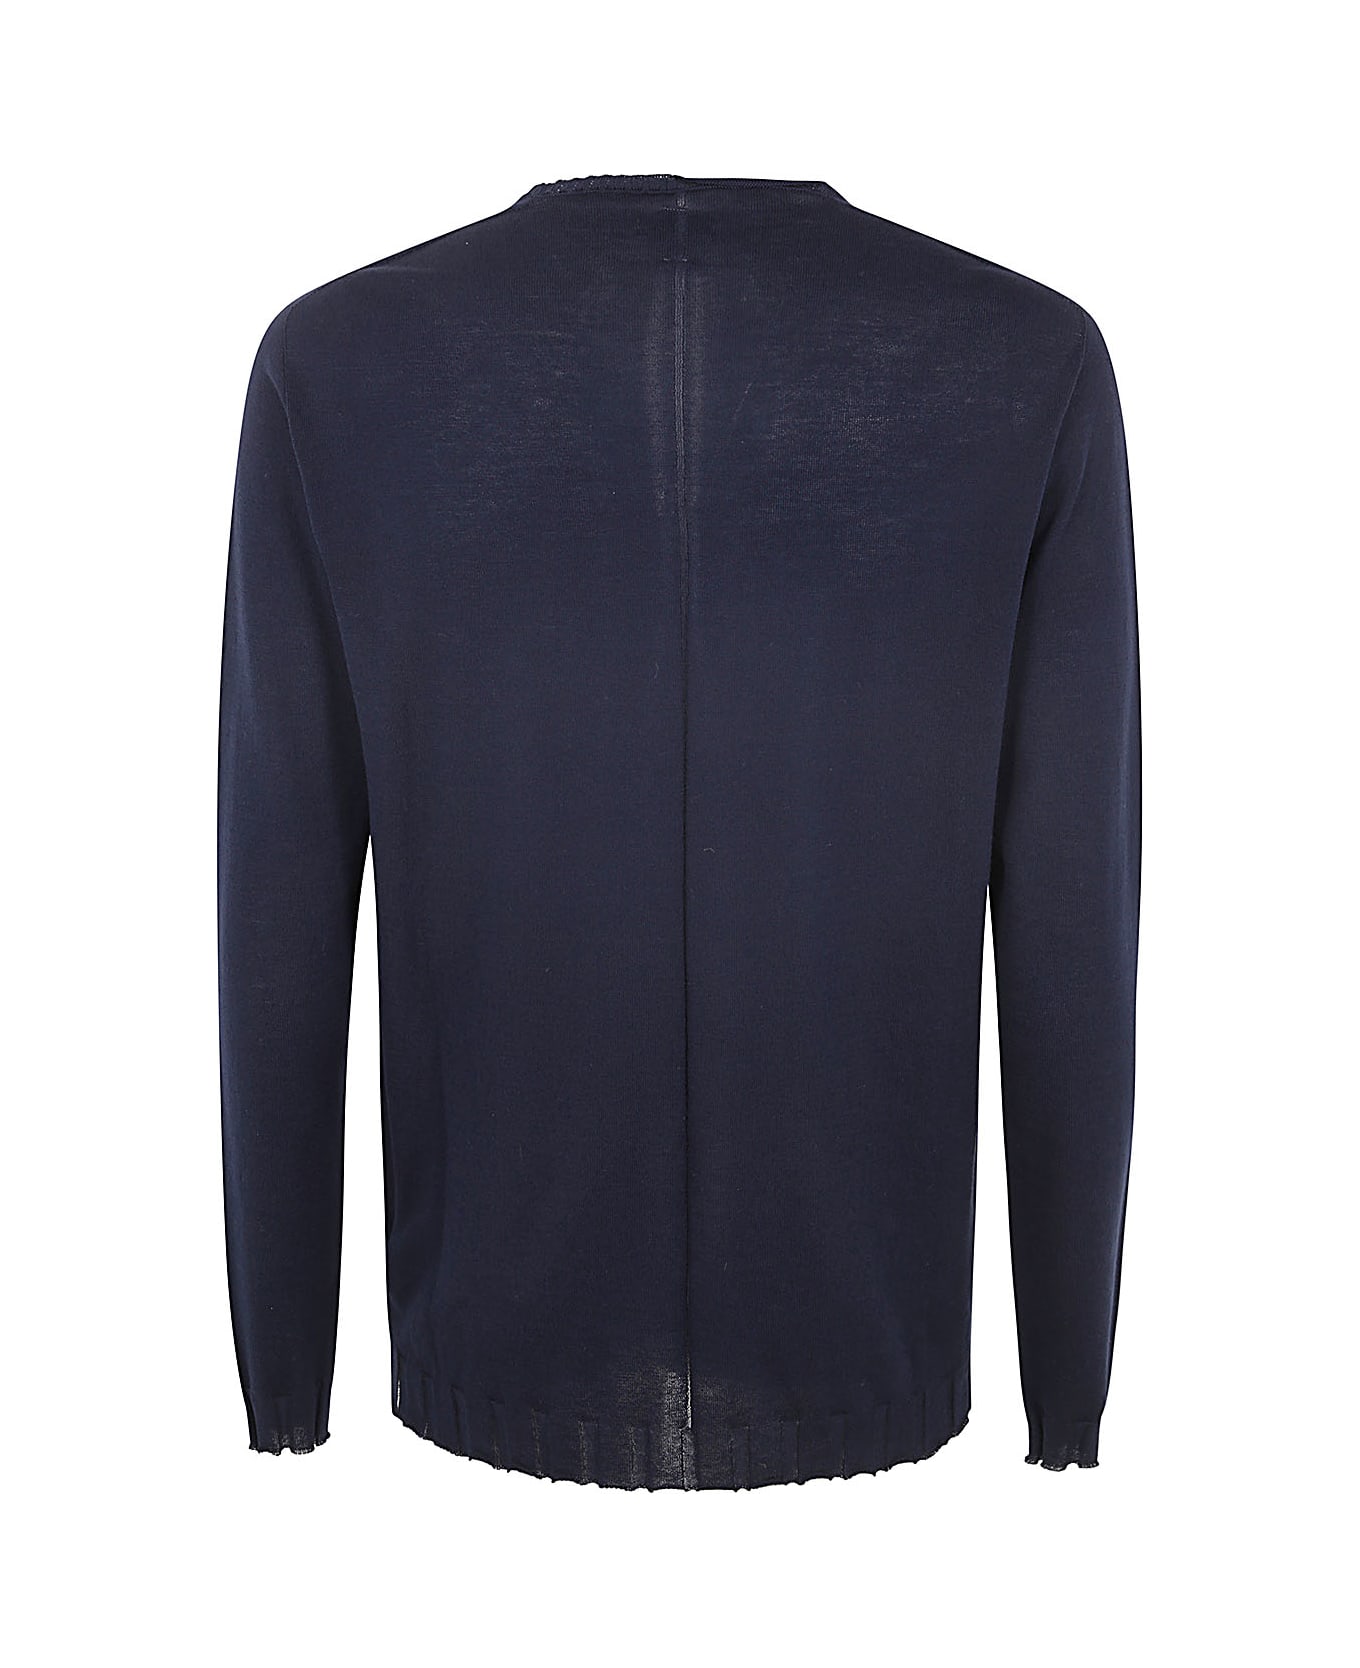 MD75 Classic Round Neck Pullover - Basic Blue